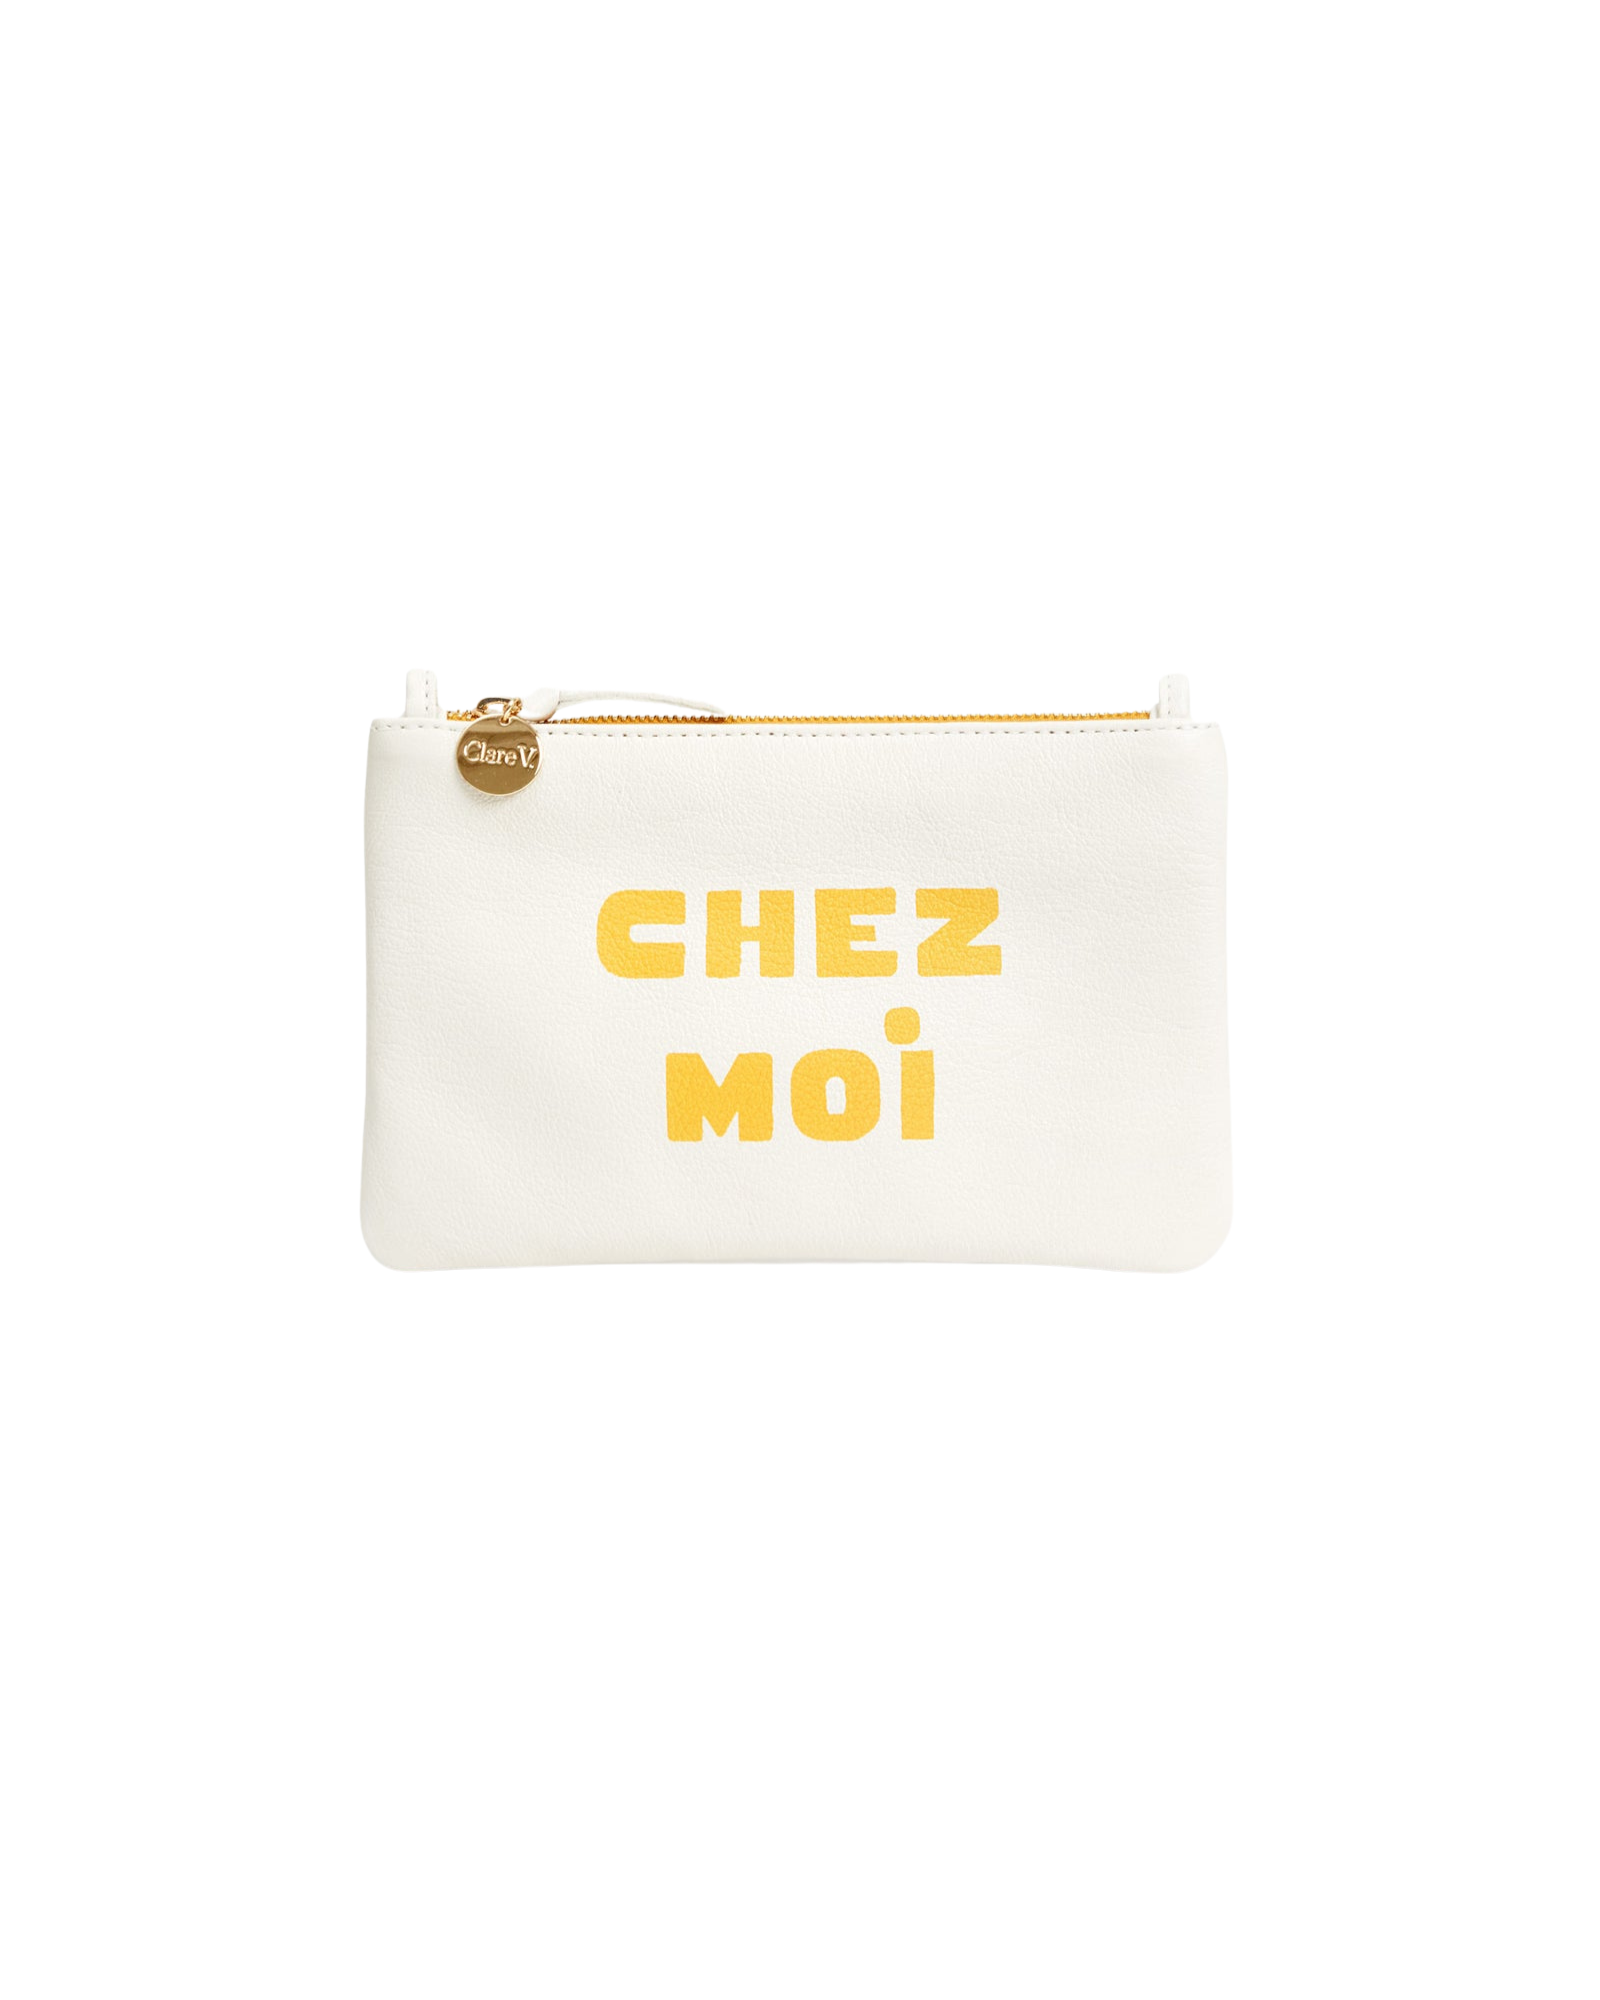 Clare V. Wallet Clutch